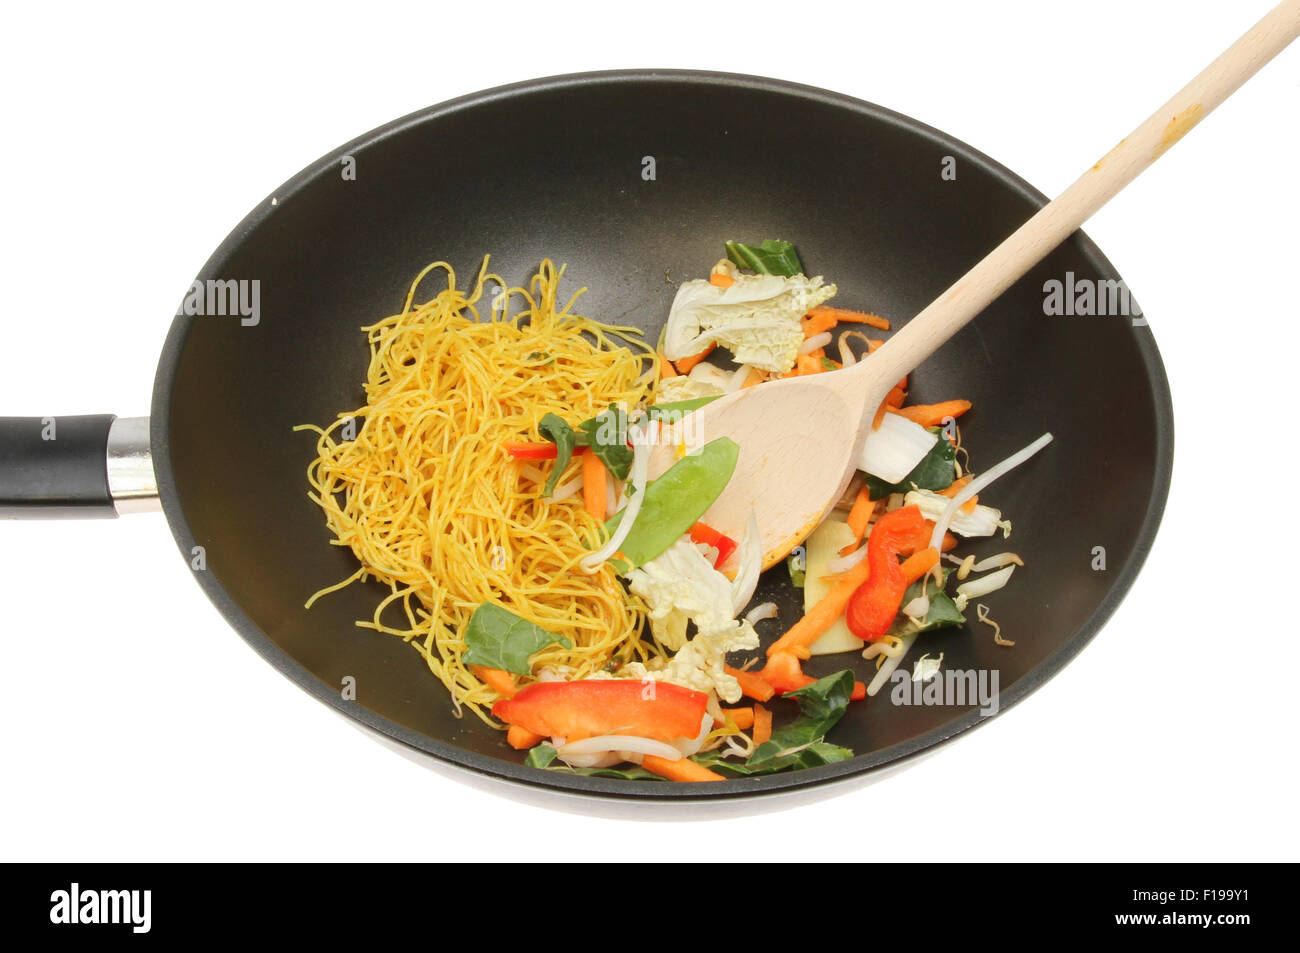 Closeup of a wok with stir fry vegetables and noodles with a wooden spoon isolated against white Stock Photo